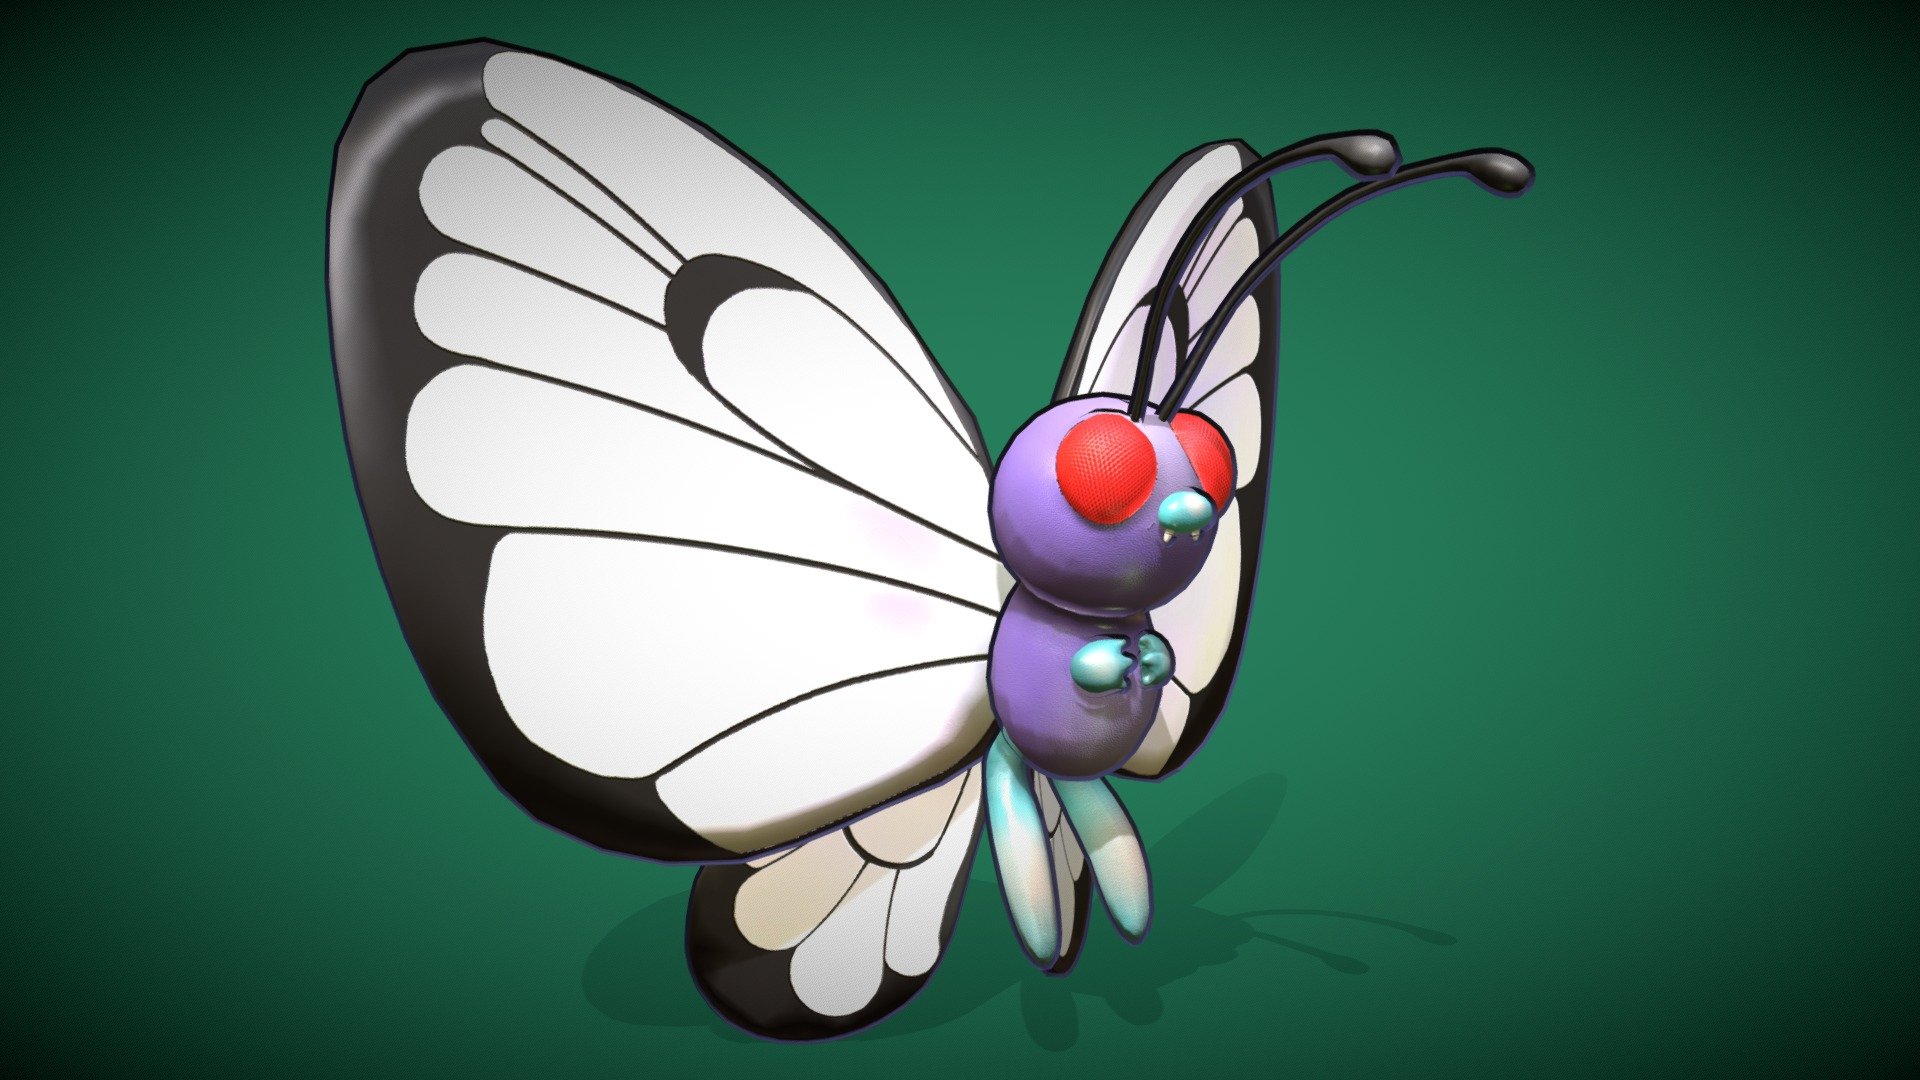 Pokemon Fan Art Butterfree
Crits are always welcomed :D

-Breakdown-
Total Time      = 10.5 hrs
Zbrush            = 3.5hrs
Topogun         = 2.5hrs
3ds Max          = 1.5hr (unwrapping)
Substance P   = 1hr
3ds Max          = 1hr (Cleanup)
Marmoset       = 1hr (pretty shots) - Butterfree - Download Free 3D model by fanaya2001 3d model